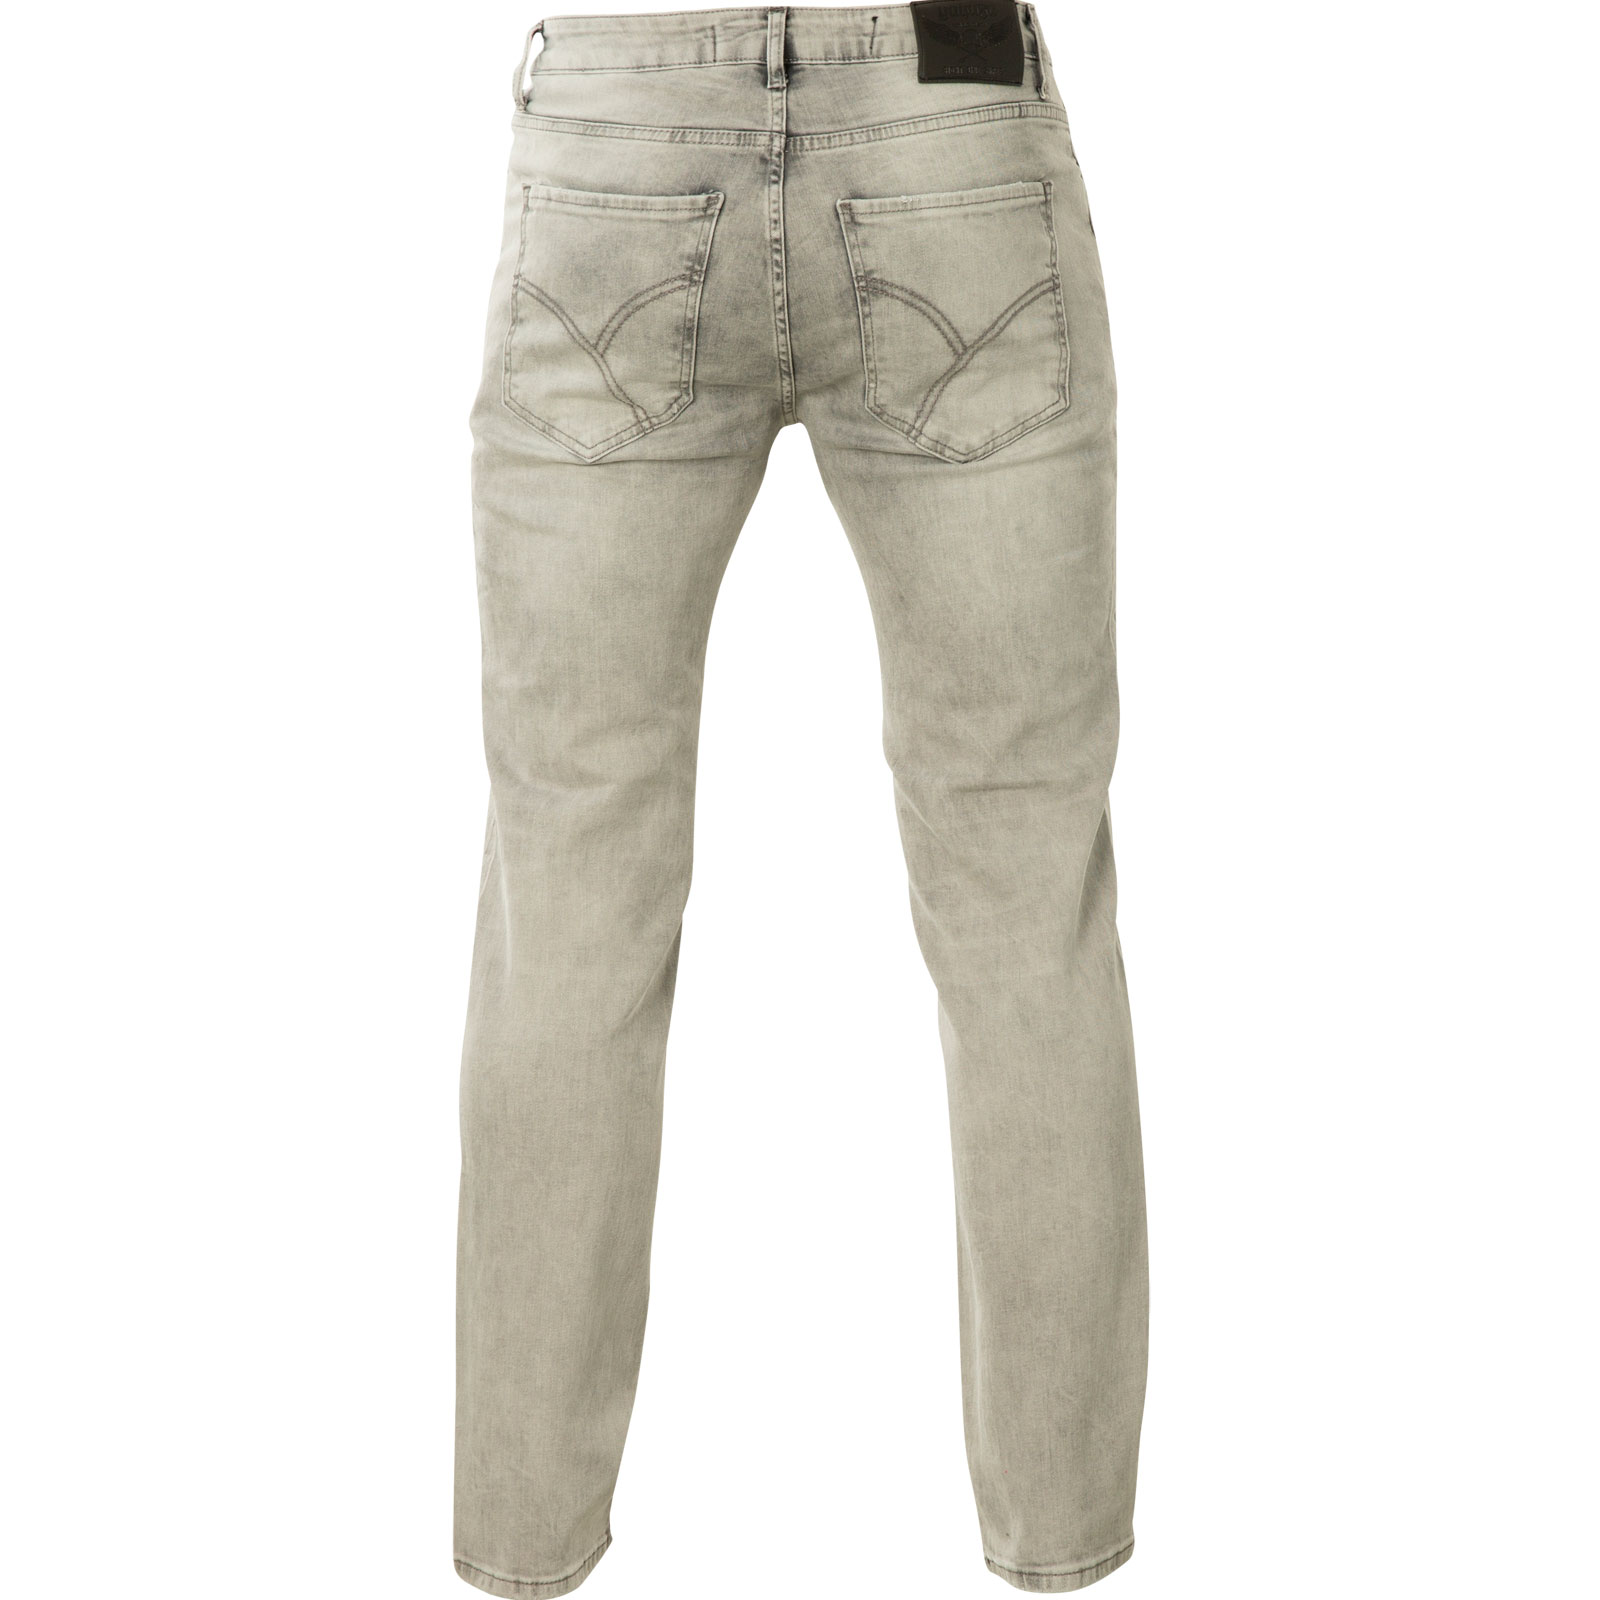 Yakuza 420 Straight Jeans JEB-16068 with lots of holes and tears